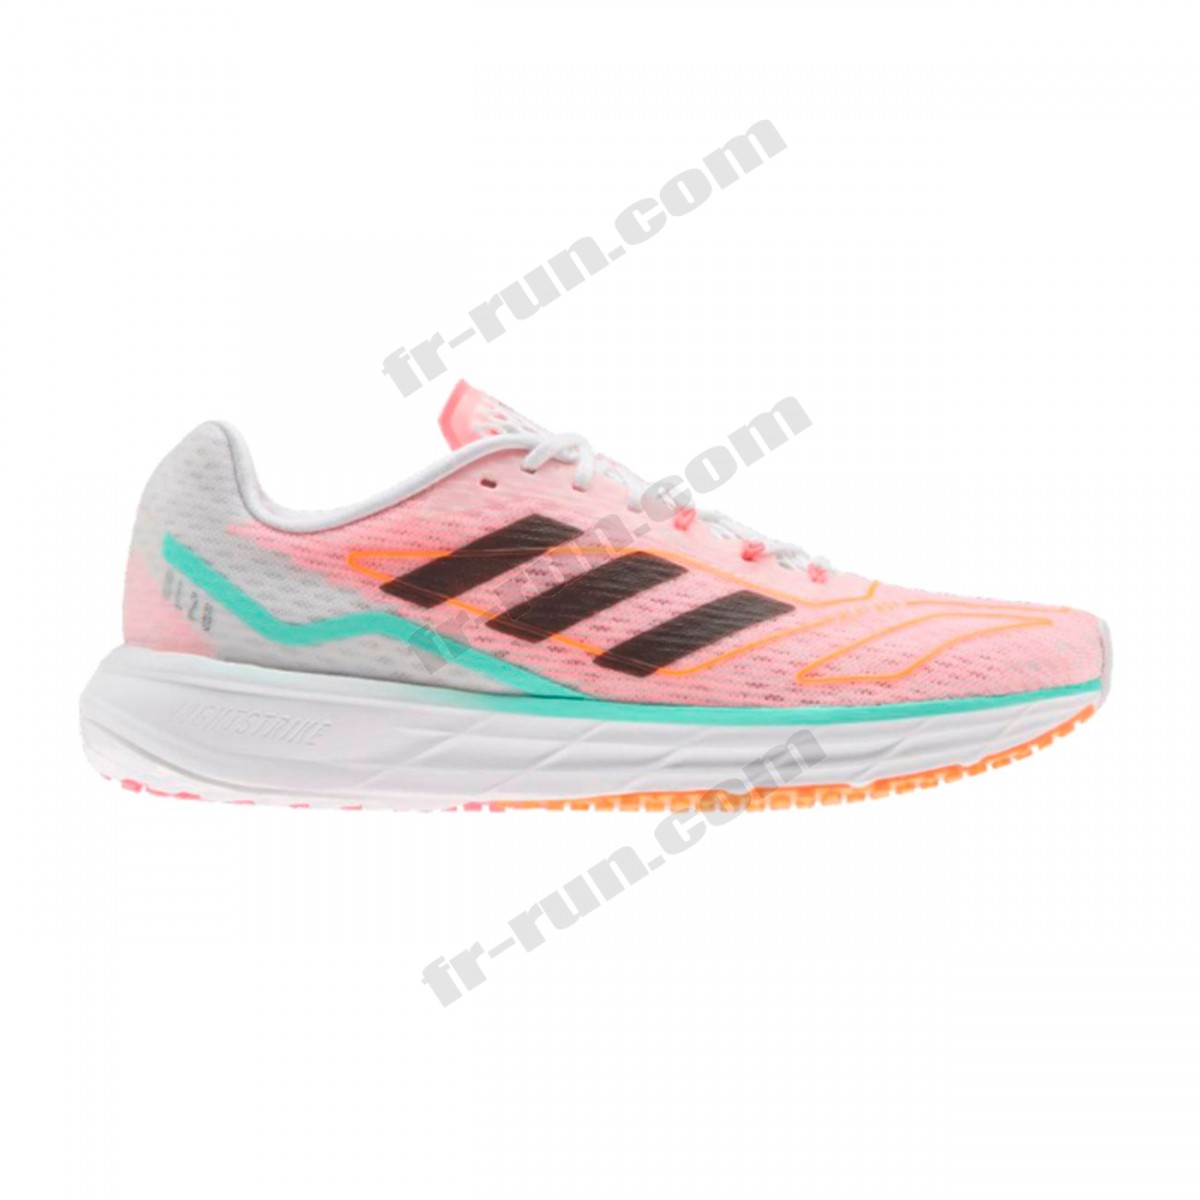 Adidas/CHAUSSURES BASSES running femme ADIDAS SL20.2 W √ Nouveau style √ Soldes - -0